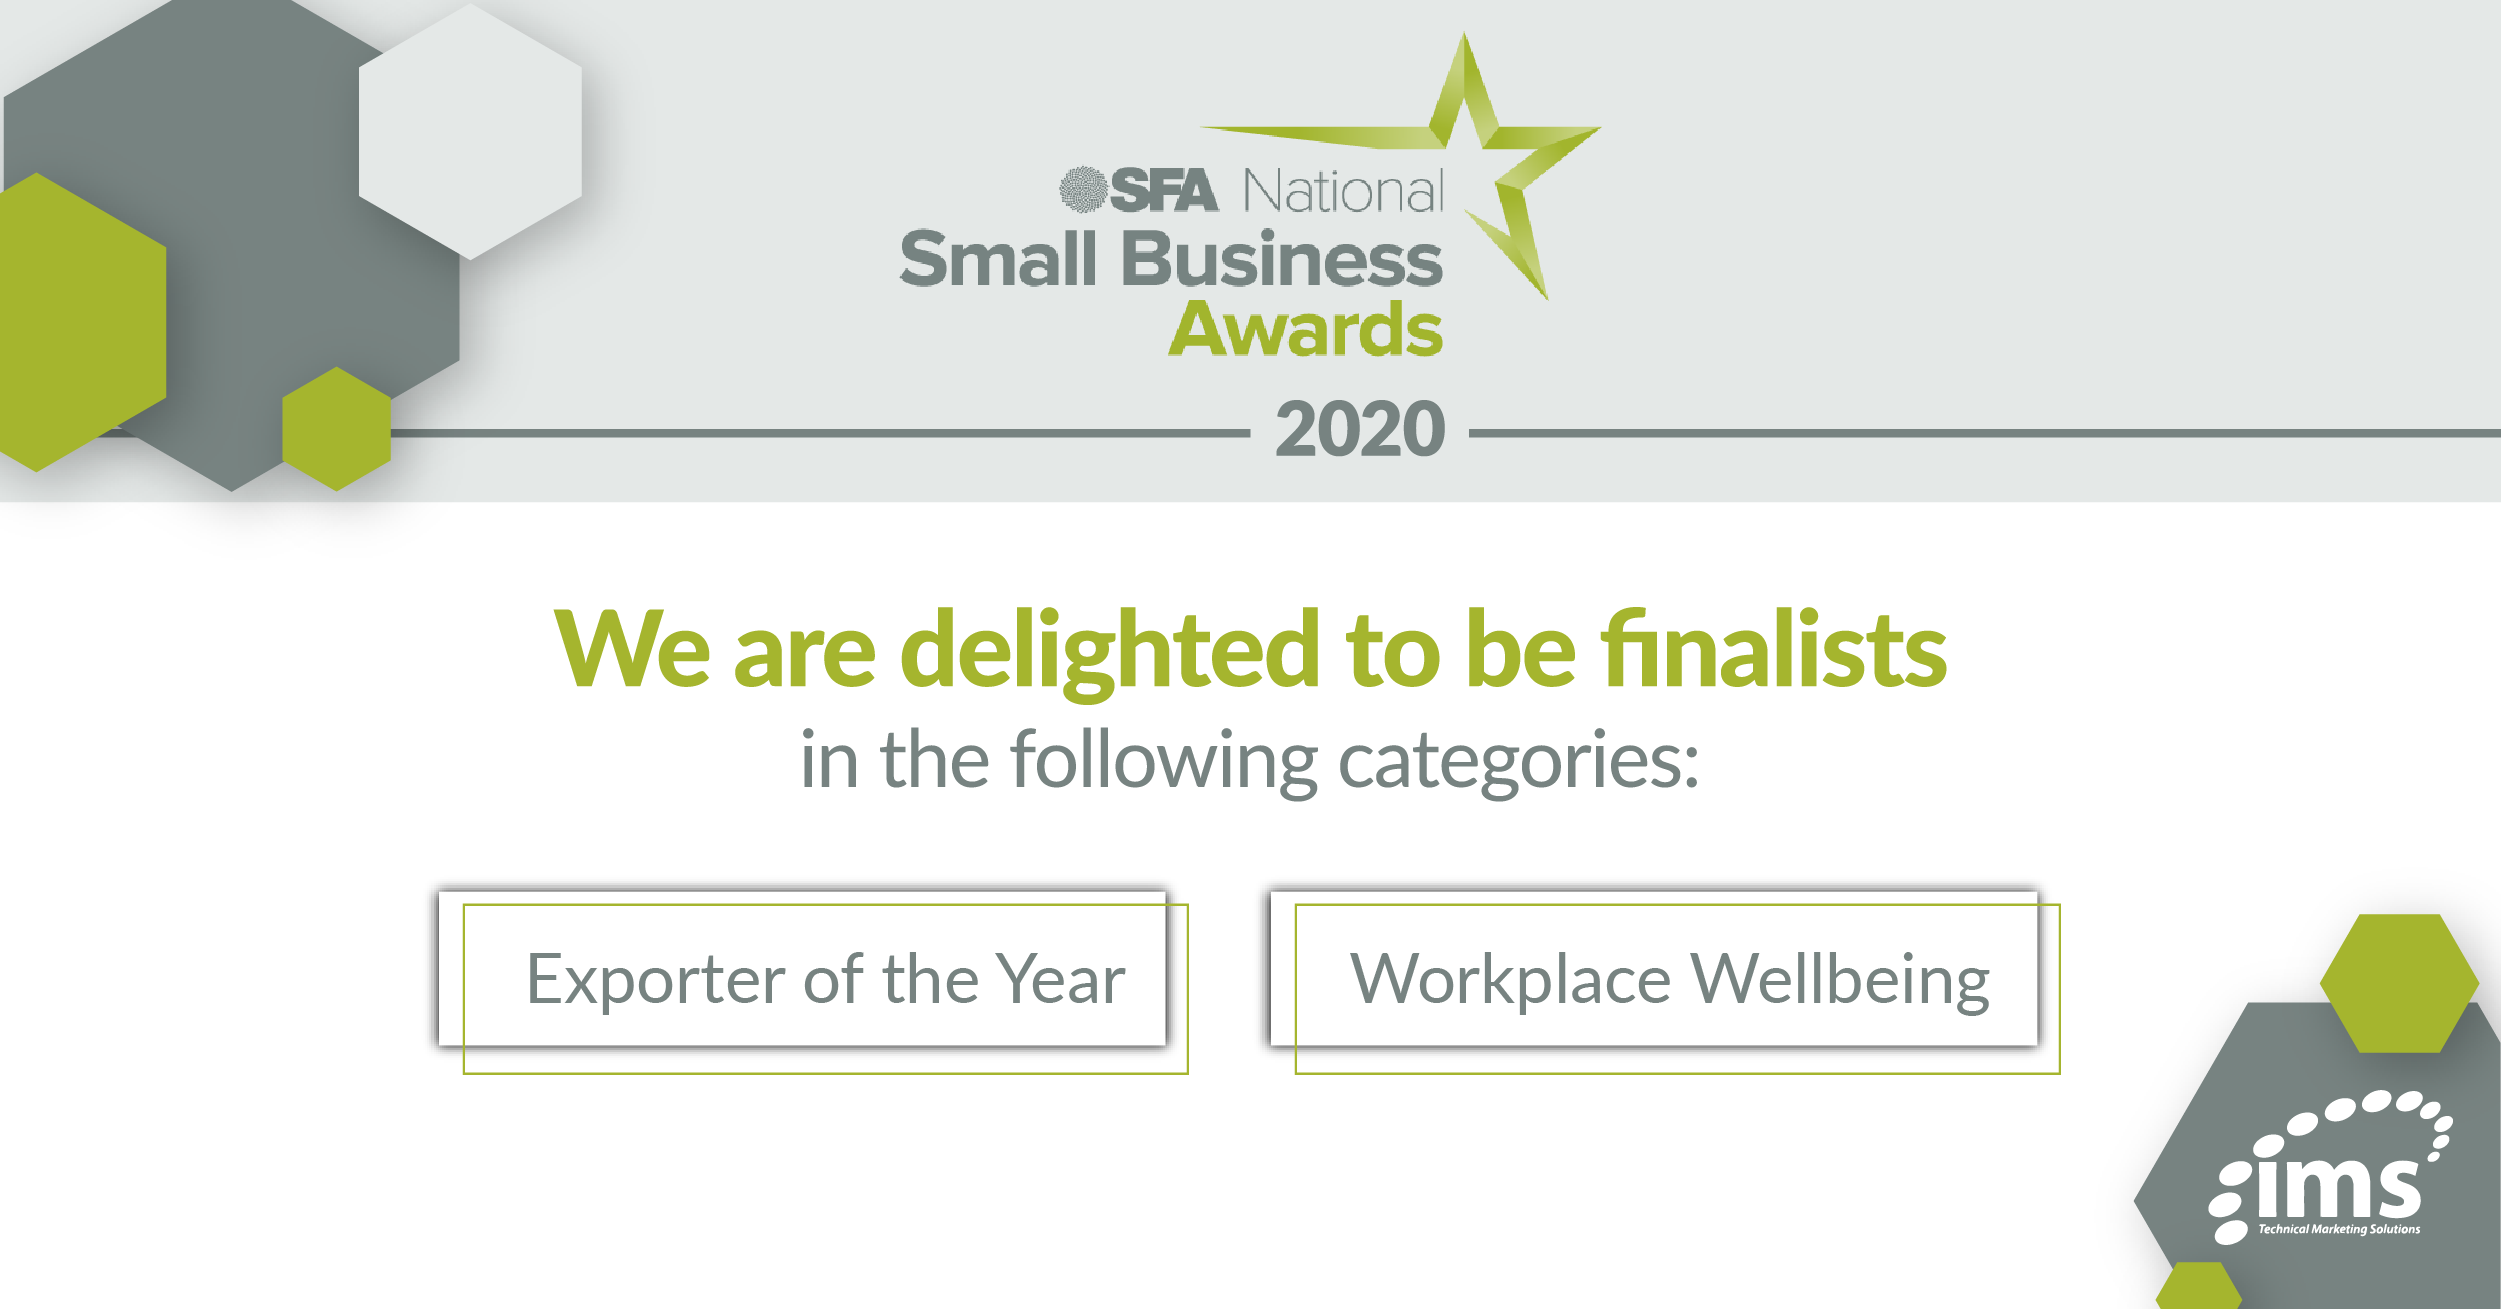 IMS Marketing are finalists for the SFA small business awards 2020